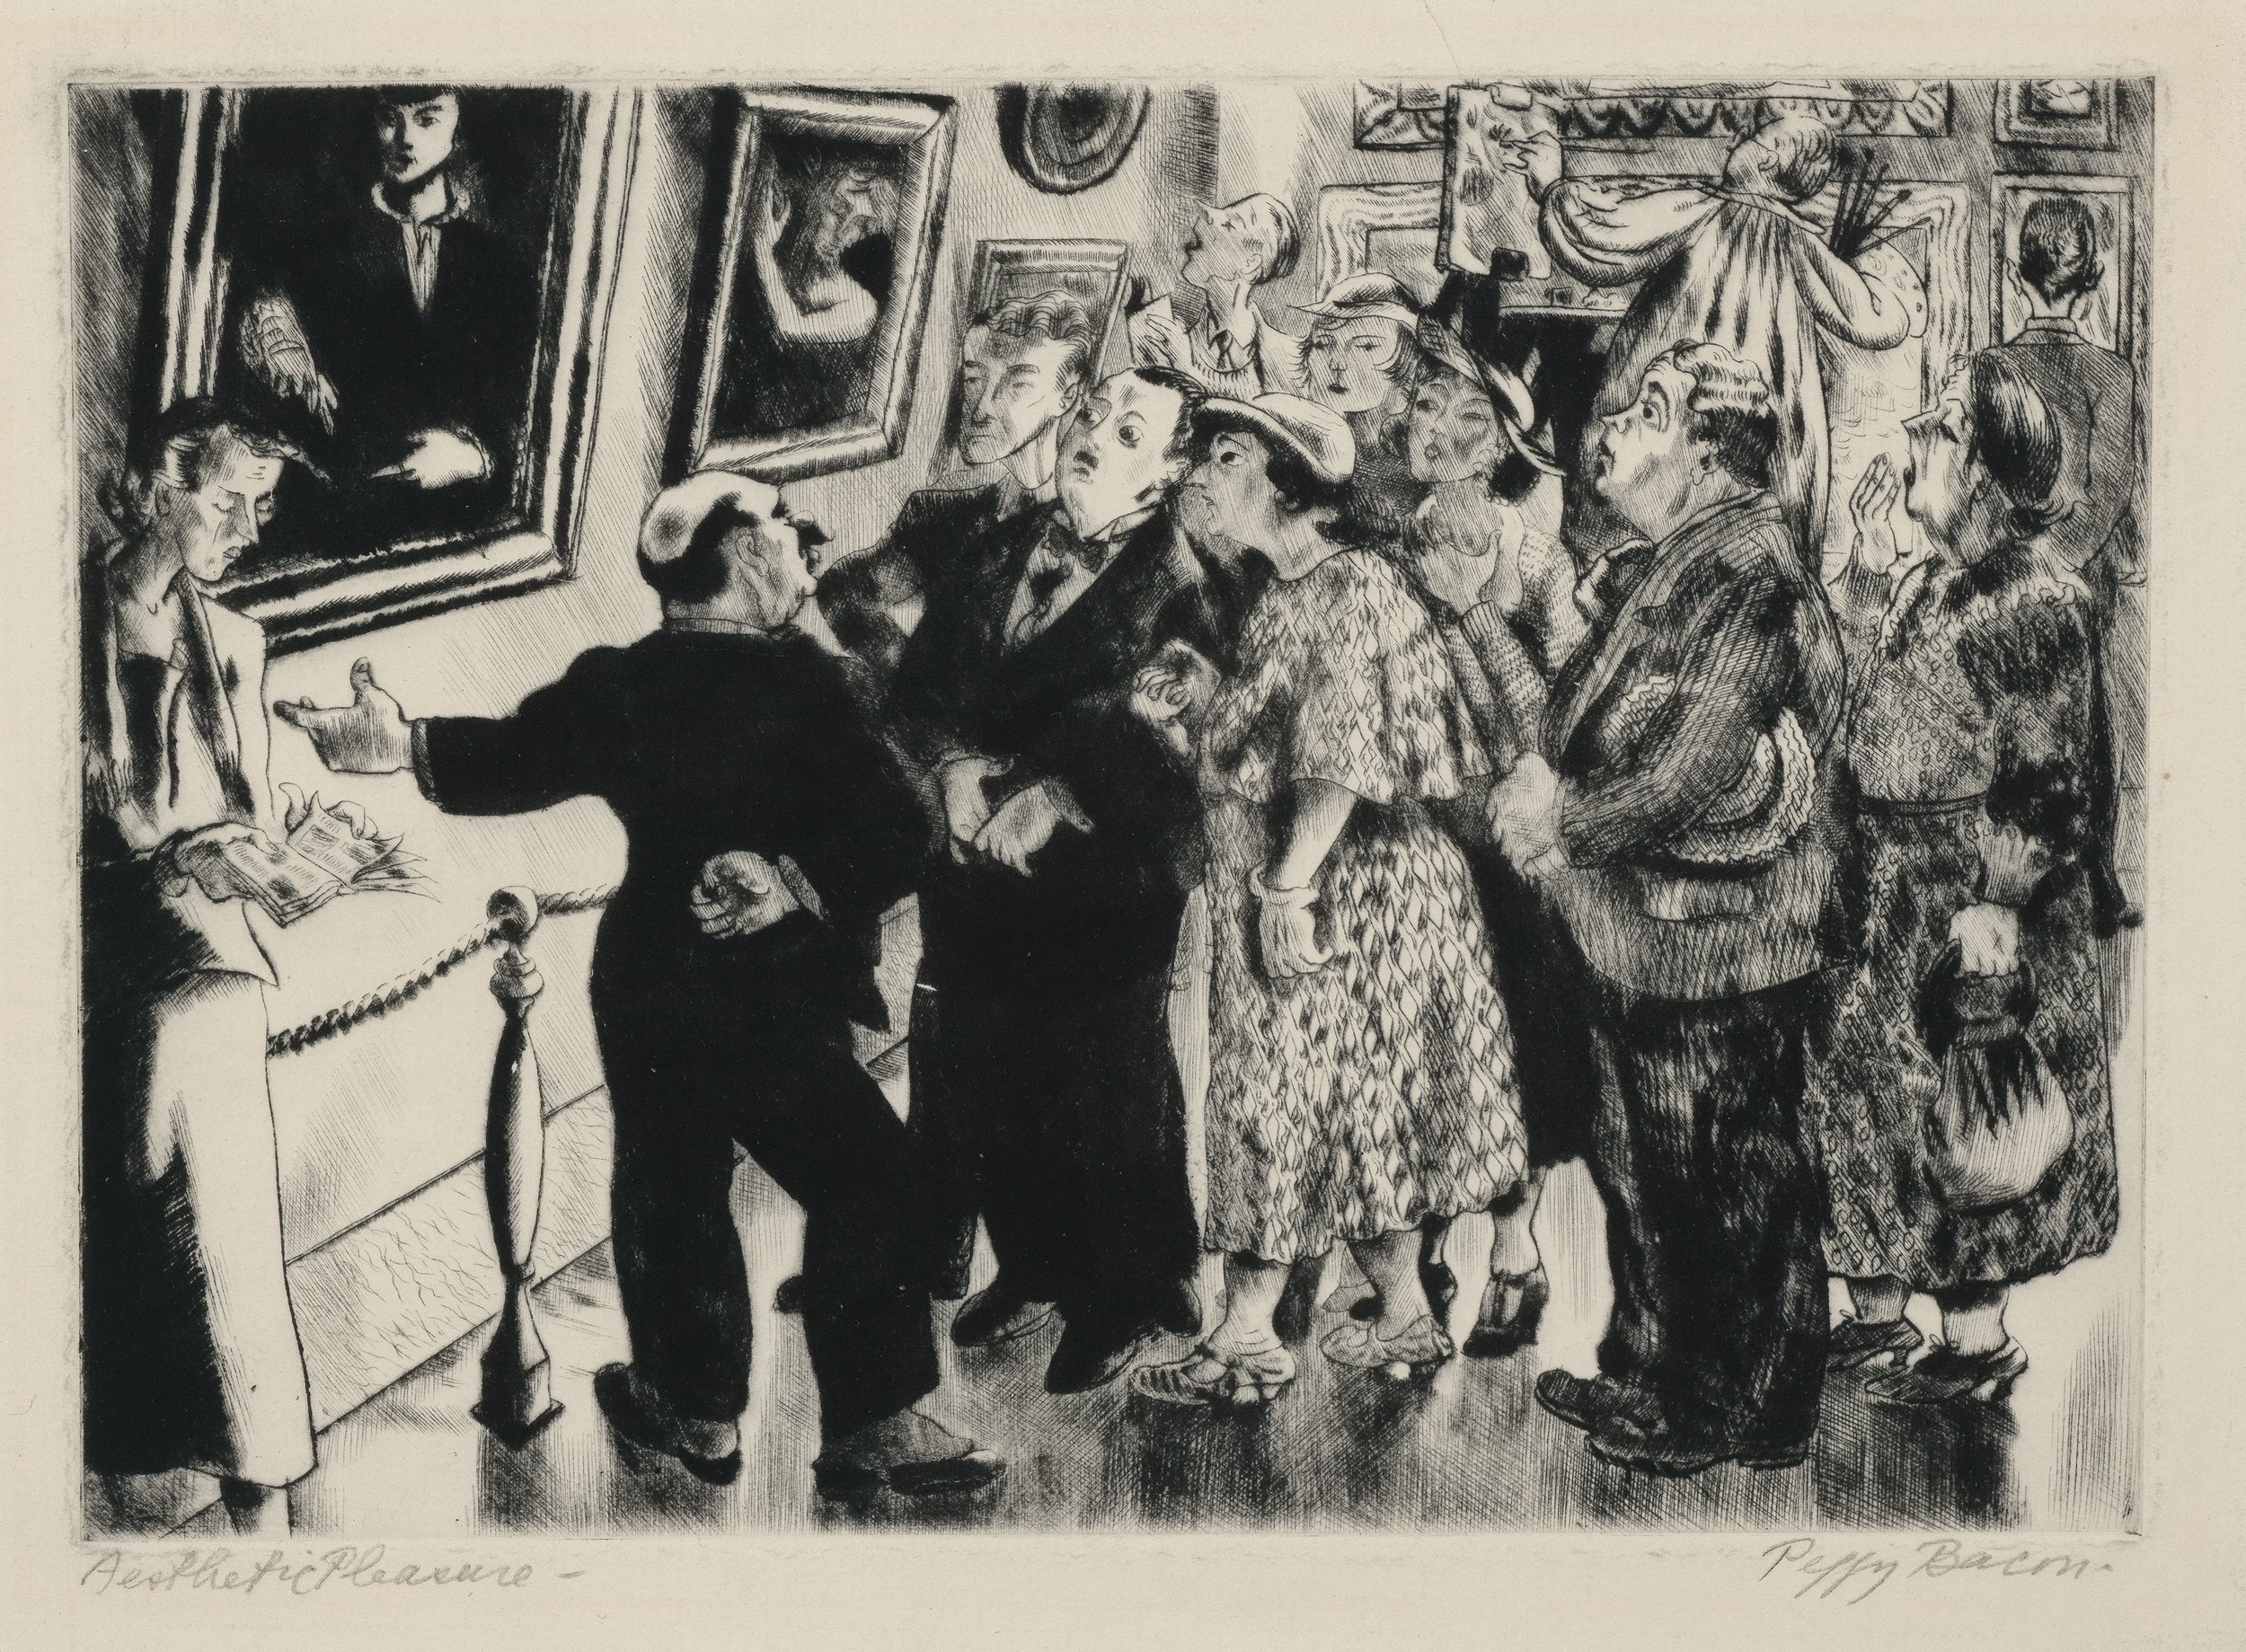  Peggy Bacon (United States, 1895–1987),  Aesthetic Pleasure , 1936, drypoint on laid paper, 7 3/16 x 10 7/8 inches. Gift of Harold Shaw, 1984.387. Image courtesy Petegorsky/Gipe Photo 